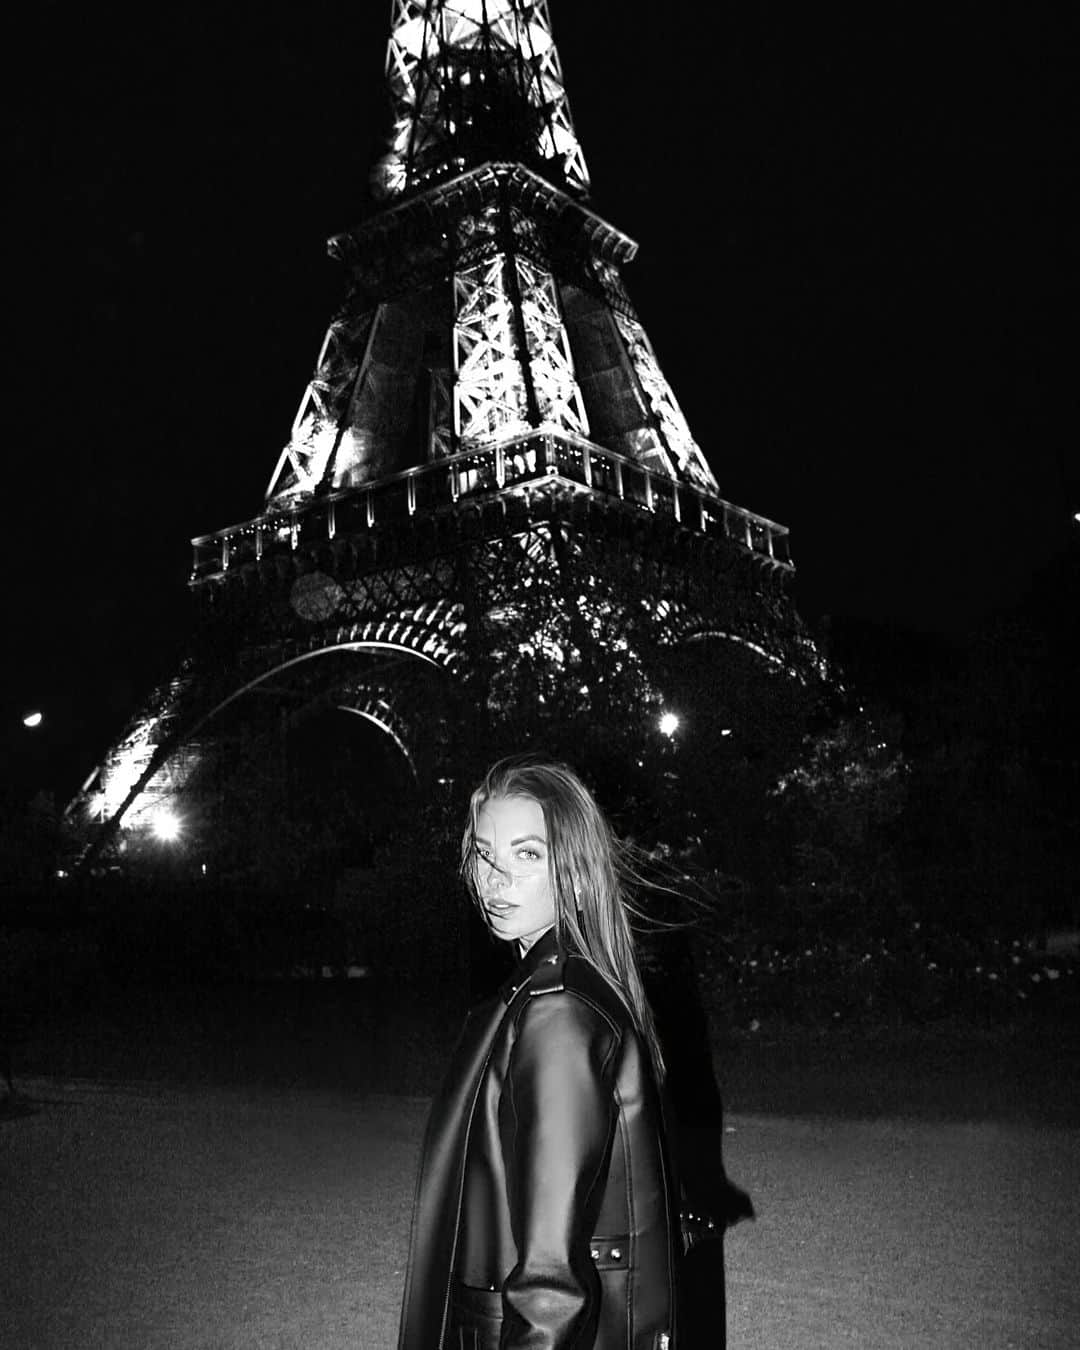 メリティナ・スタニウタのインスタグラム：「( на мове ⬇️) Found the most perfect place to feel lonely - top of Tour Eiffel ✨️   Literally,  if you want to test yourself how do you feel being alone - get to the most romantic city and climb all the way up on your own observing kissing couples and excited families around.   La Tour Eiffel was my dream for kinda 20 years and among not pleasant sircumstances I appeared in Paris and got this opportunity.  I made it last night , it wasn't planned  but definitely realized that if I won't- I would regret .   How I felt ?... strange ... not lonely , but neither free and strong . Still trying to taste the basement of this mixed emotions cocktail...  And you  could you do it on your own ?   Знайдзена месца на свеце , дзе лёгка адчуць 100% адзiноту . Трубы приехаць у Парыж сам насам i падняцца на башню гледзячы на парачкi ды сем'i вакол.   Я чакала год з кiм б цалавацца на башне , але ж чаканне мне абрыдла ды Парыжская башня была марай амаль 20 год , таму вырашыла падняцца самой учора ноччу .   Як я адчувала ?... цiкава , але гэта амаль сакральны момент ды я рада , што зрабiла гэта адна ...такая вось любоў‎ да сябе 🥰. Але ж нават зараз не разумею,  чаго больш у гэтым кактэйле эмоцый - свабоды? Адзiноты ? Летуценнасцi ? Стантаннасцi? Канца тэрмiна прыдатнасцi чакання ?..   А вы б зрабiлi так як я ?」